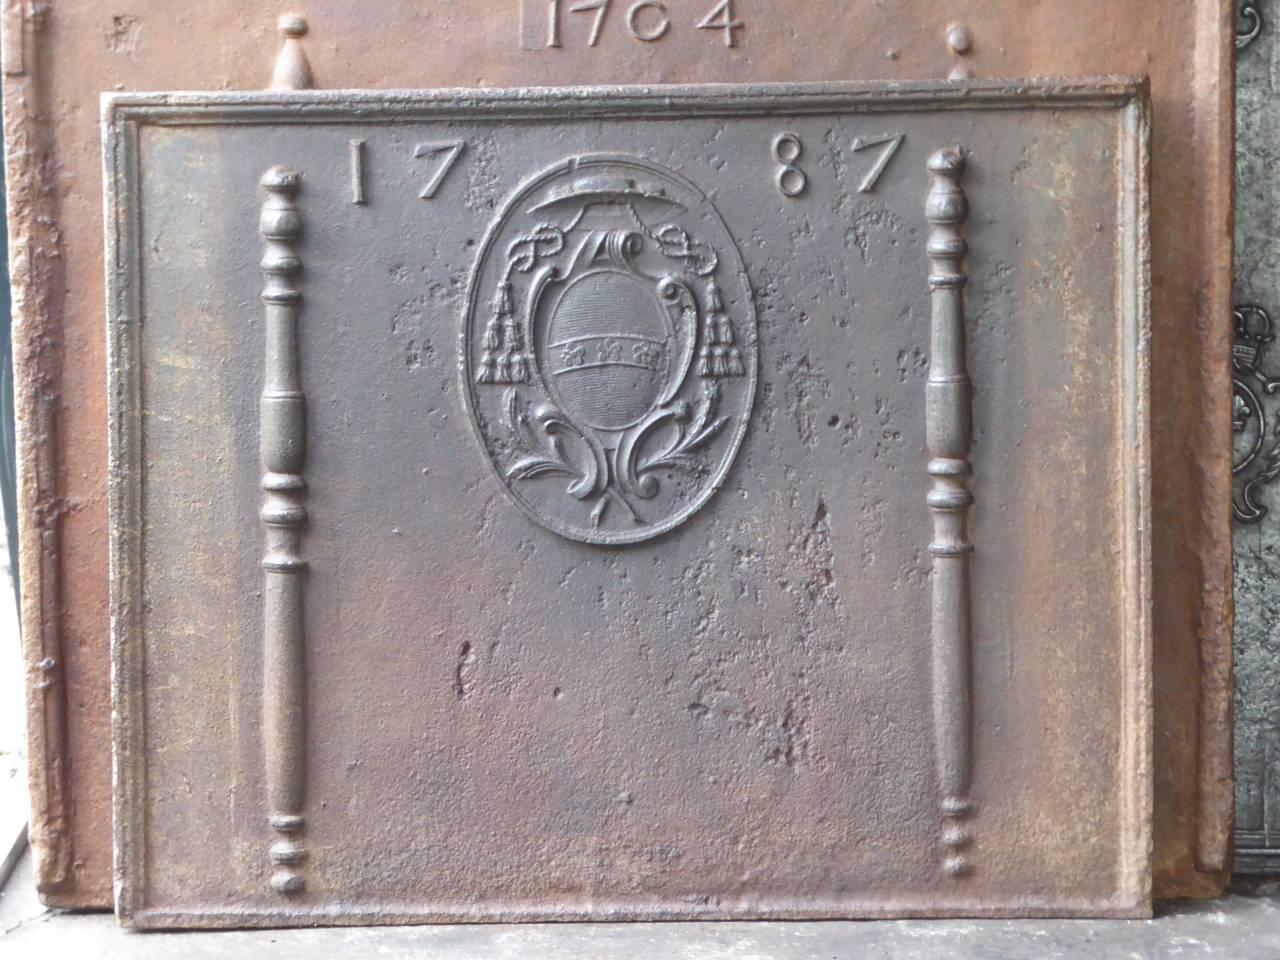 French fireback with a coat of arms, two pillars and the date of production 1787.

This product weighs more than 65 kg / 143 lbs. All our products that weigh 66 kg / 146 lbs or more are shipped as standard door-to-door freight. You can contact us to